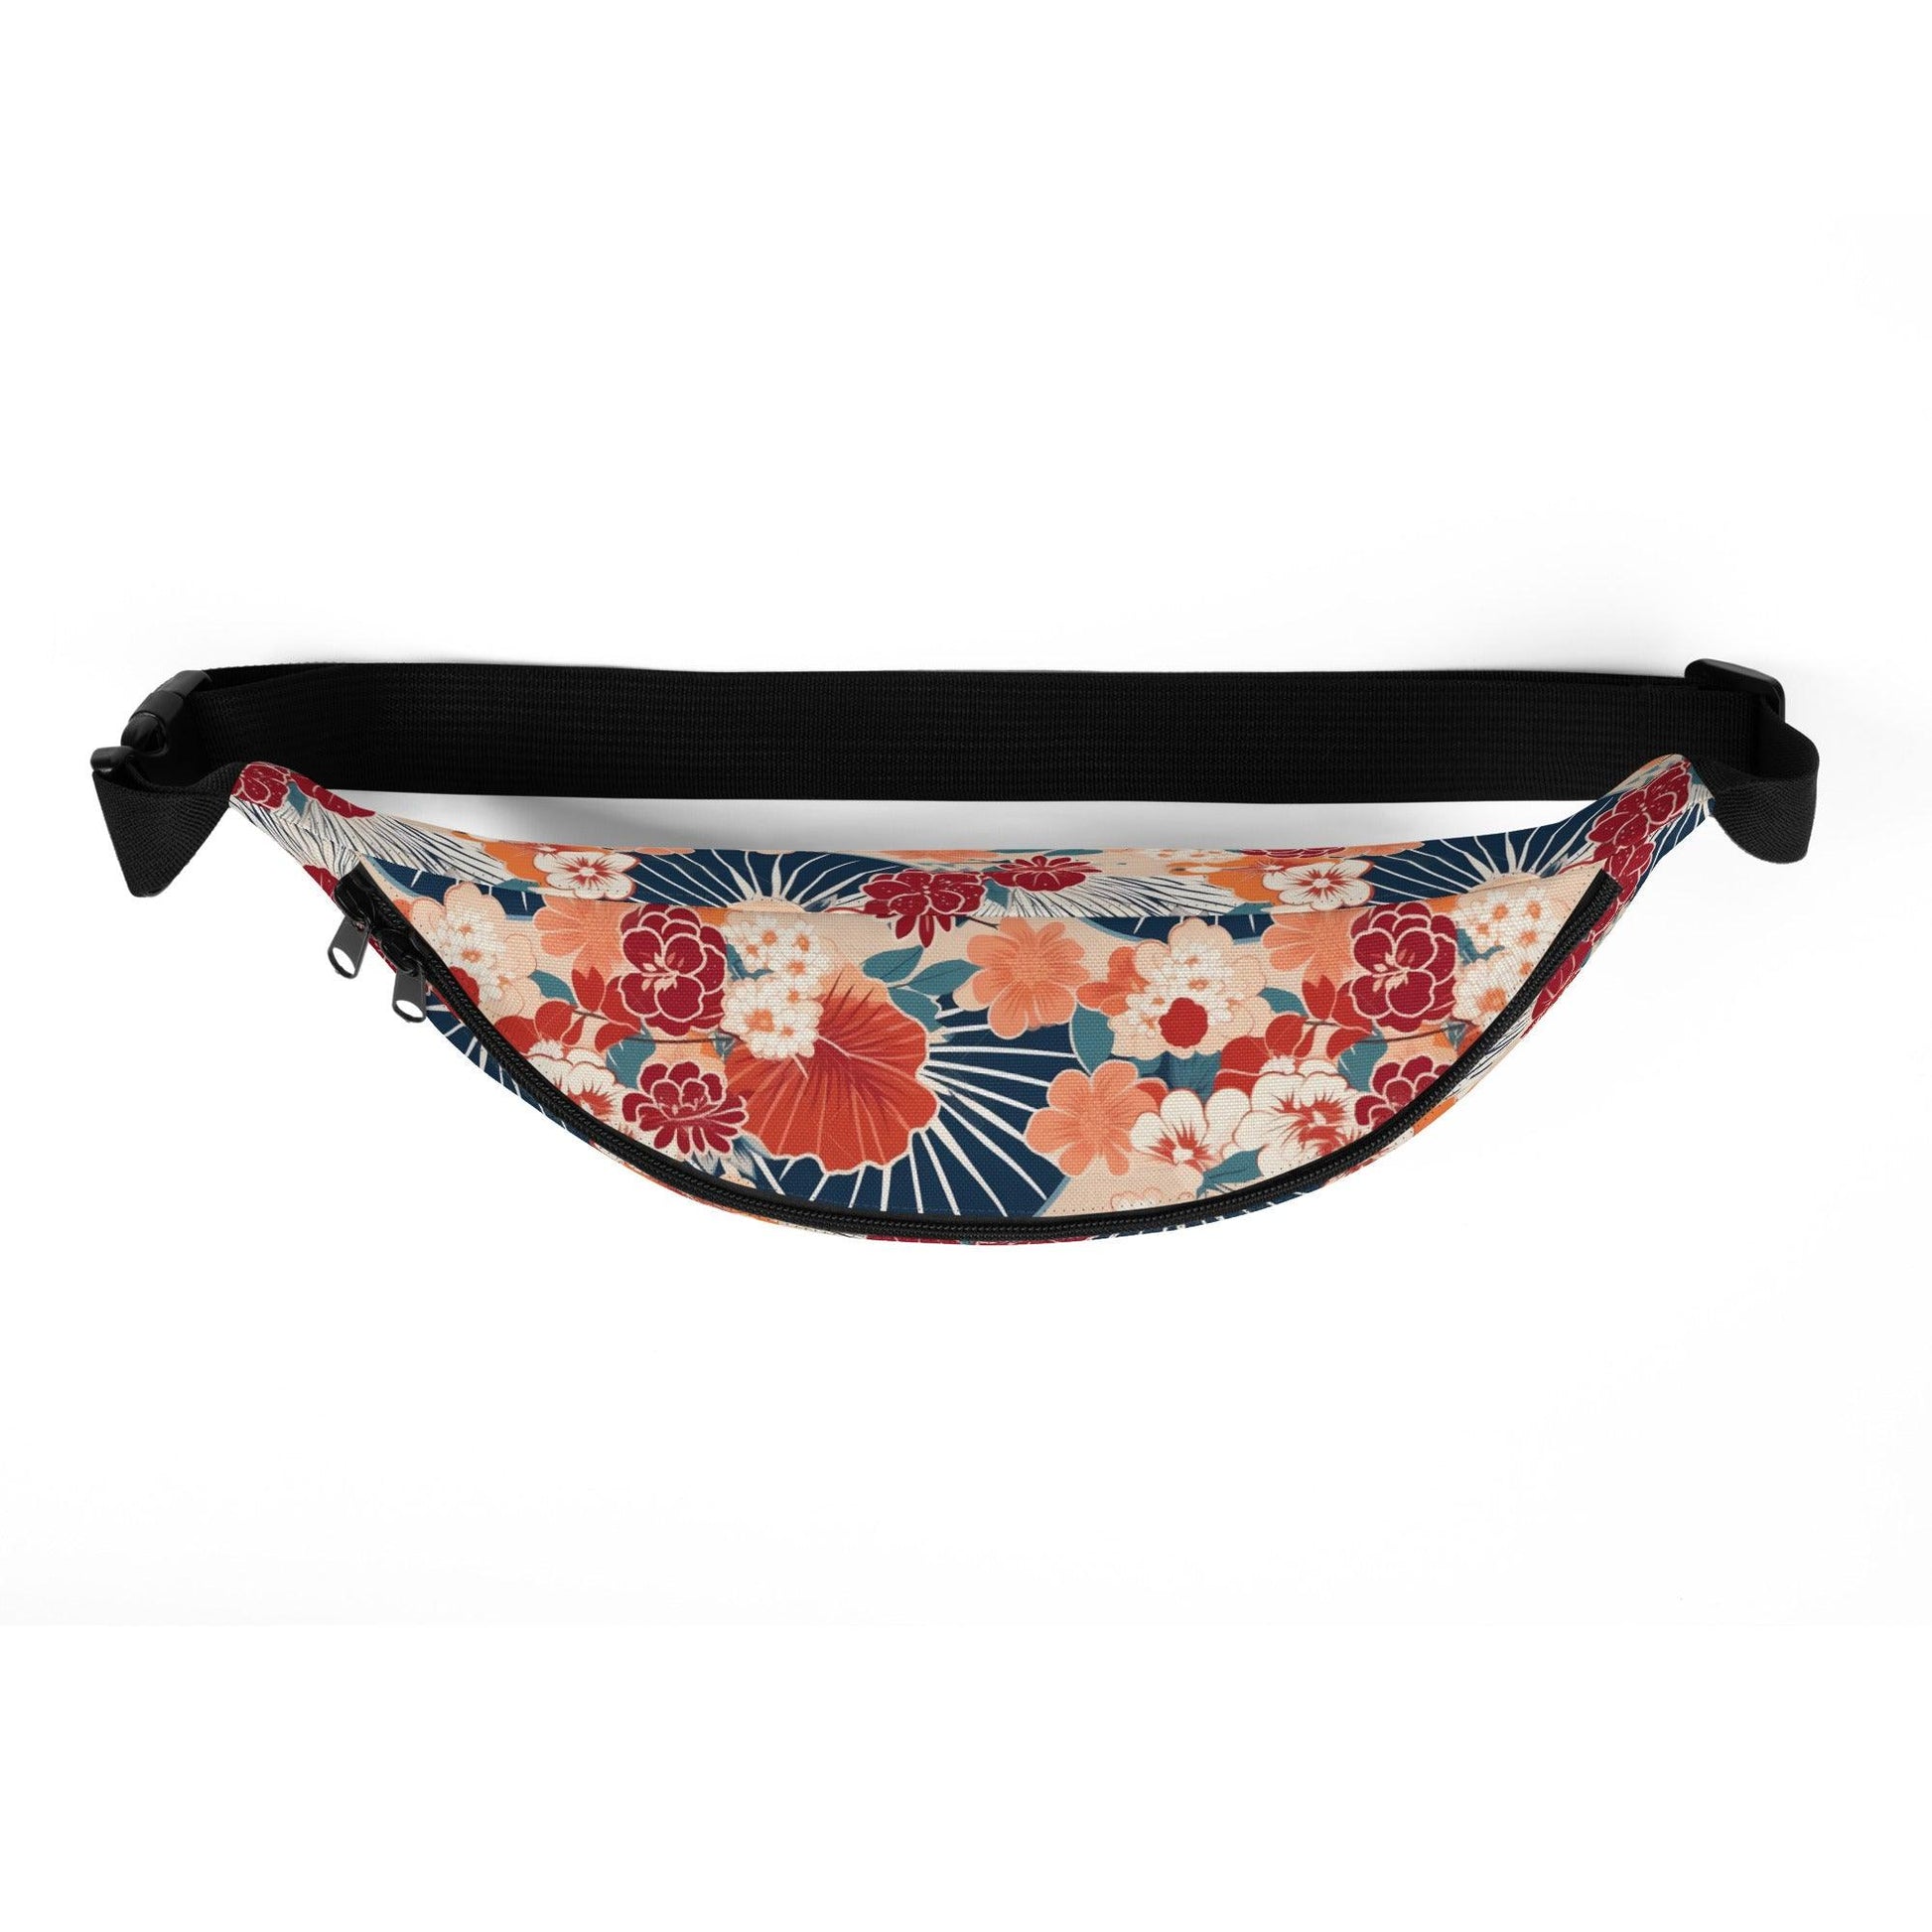 Japanese Origami Fanny Pack - The Global Wanderer